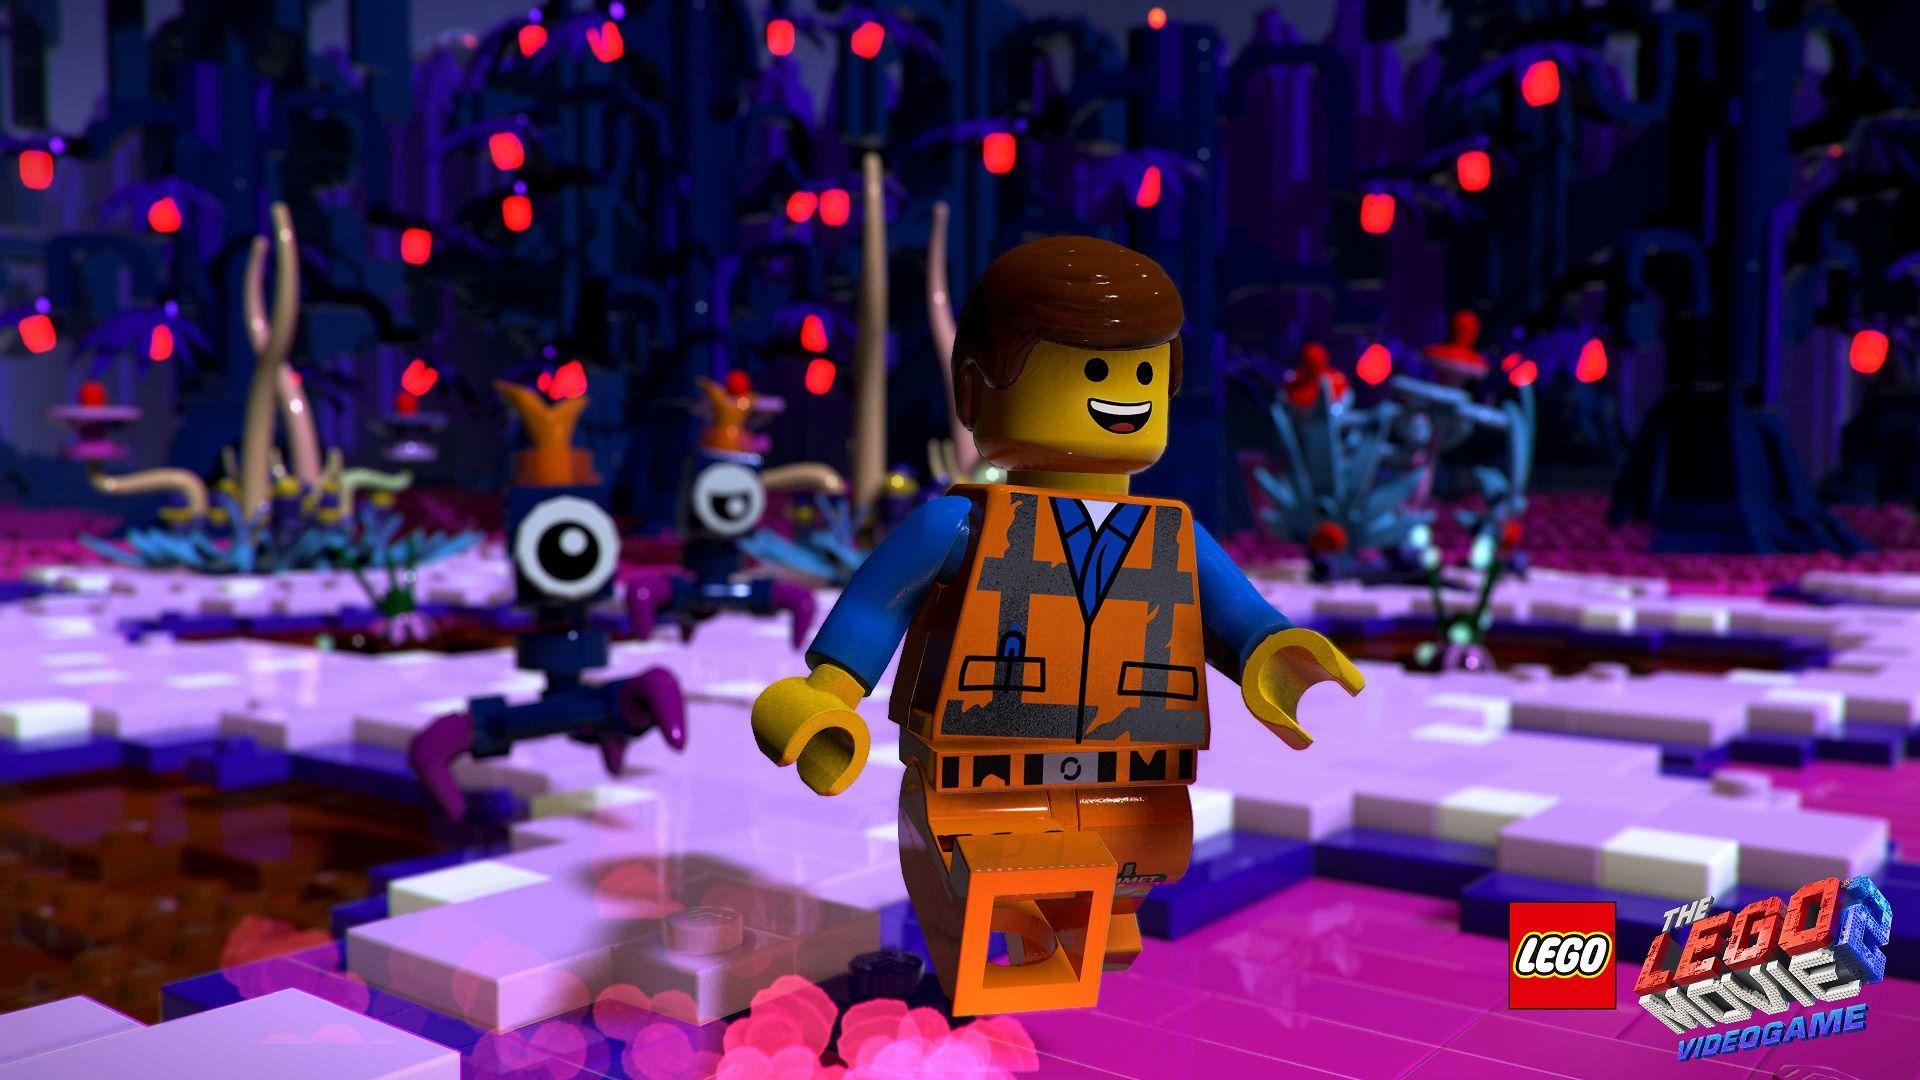 The LEGO Movie 2 Videogame announced for the Nintendo Switch